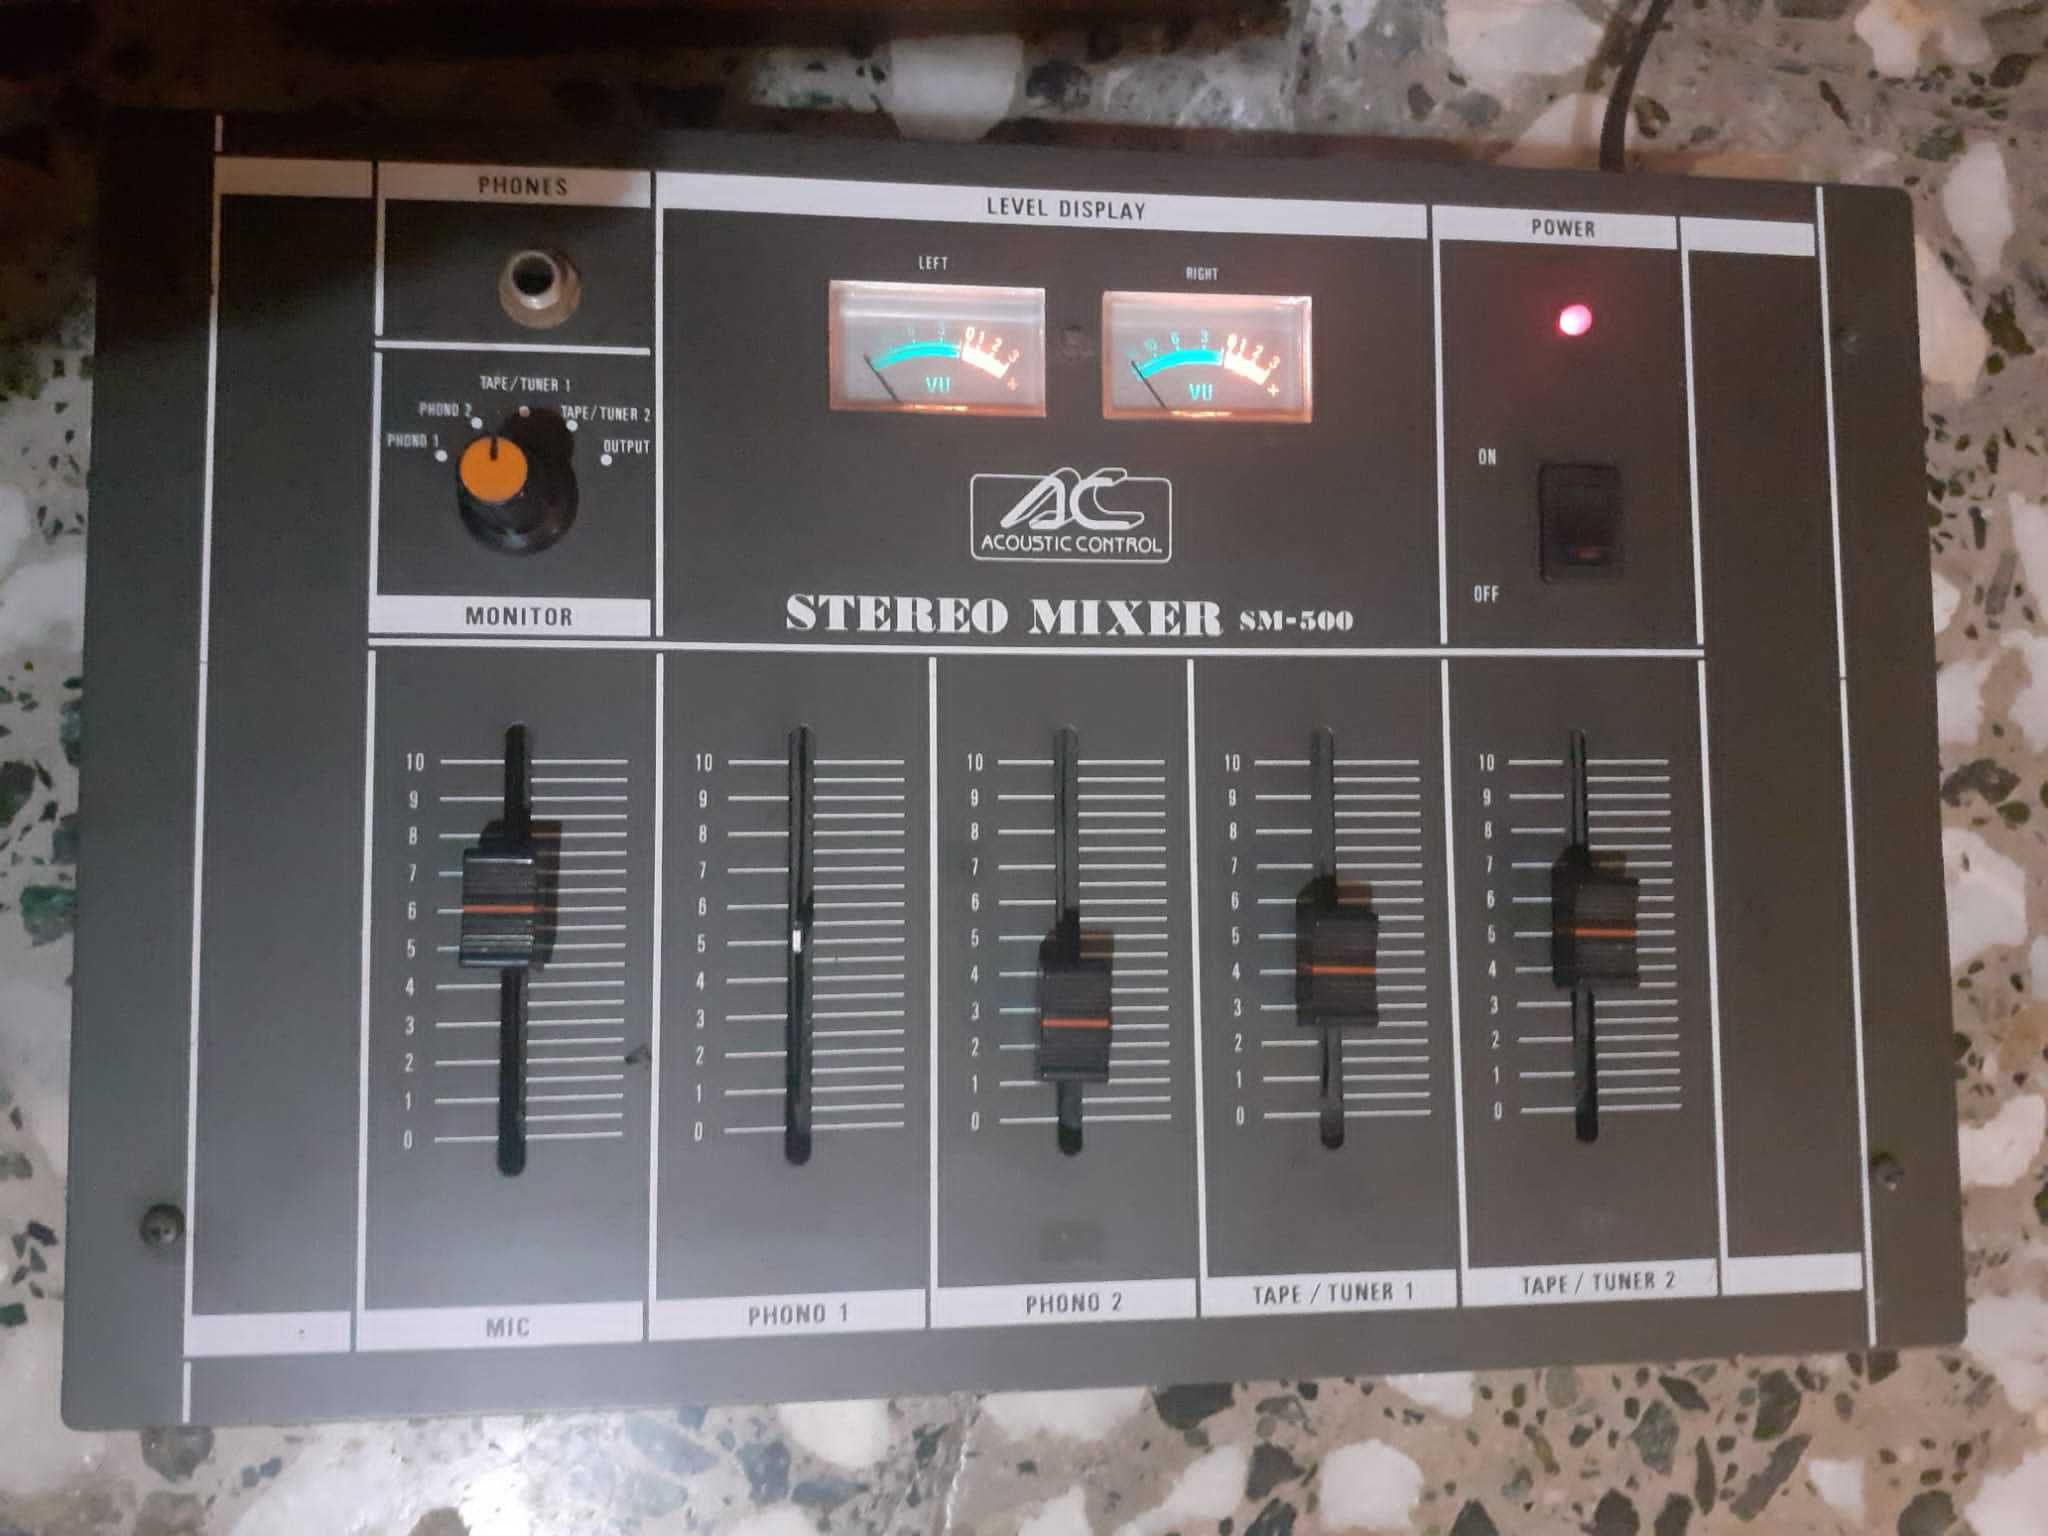 Amplificator Acoustic Control  PA-400 si stereo mixer SM-500